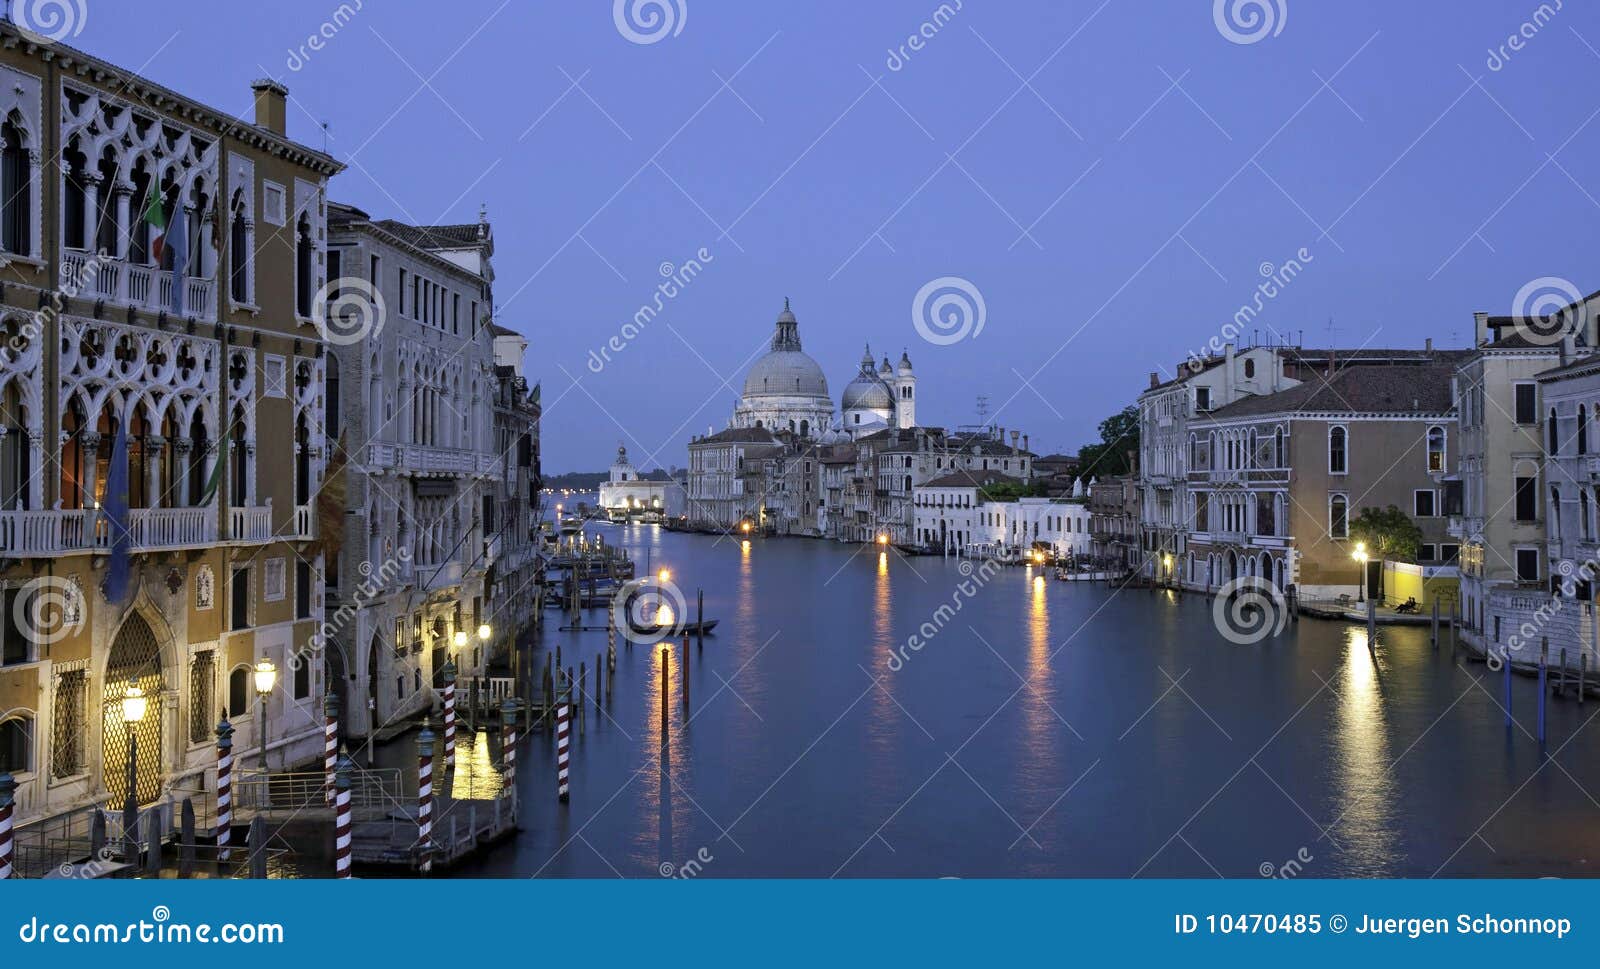 blue hour canale grande, view from academia bridge